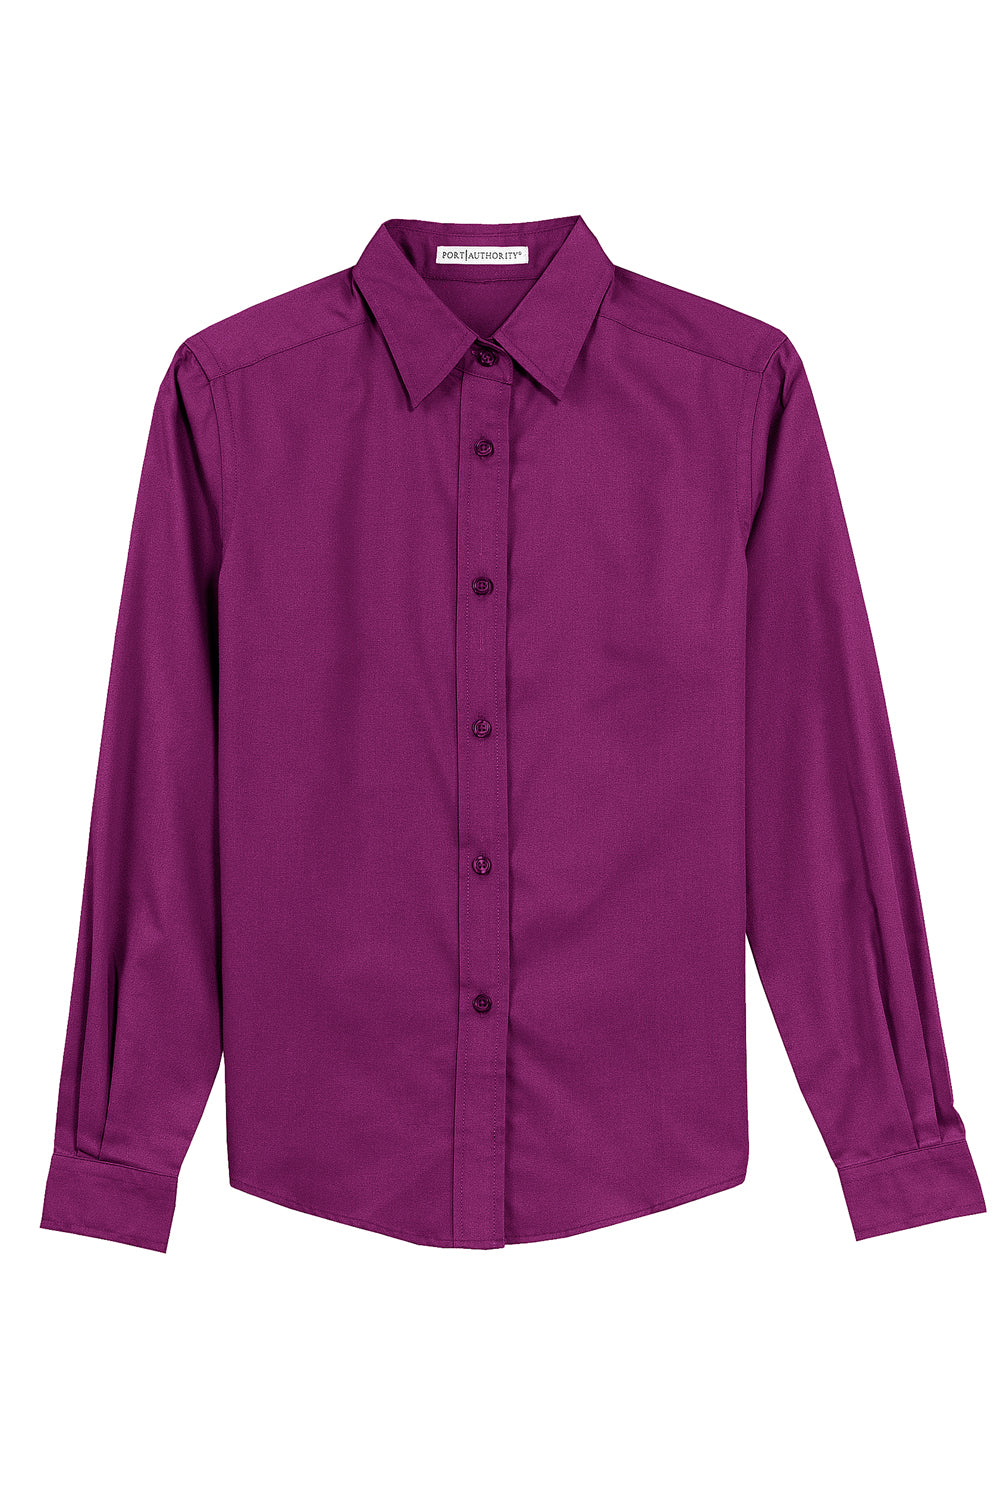 Port Authority L608 Womens Easy Care Wrinkle Resistant Long Sleeve Button Down Shirt Deep Berry Purple Flat Front